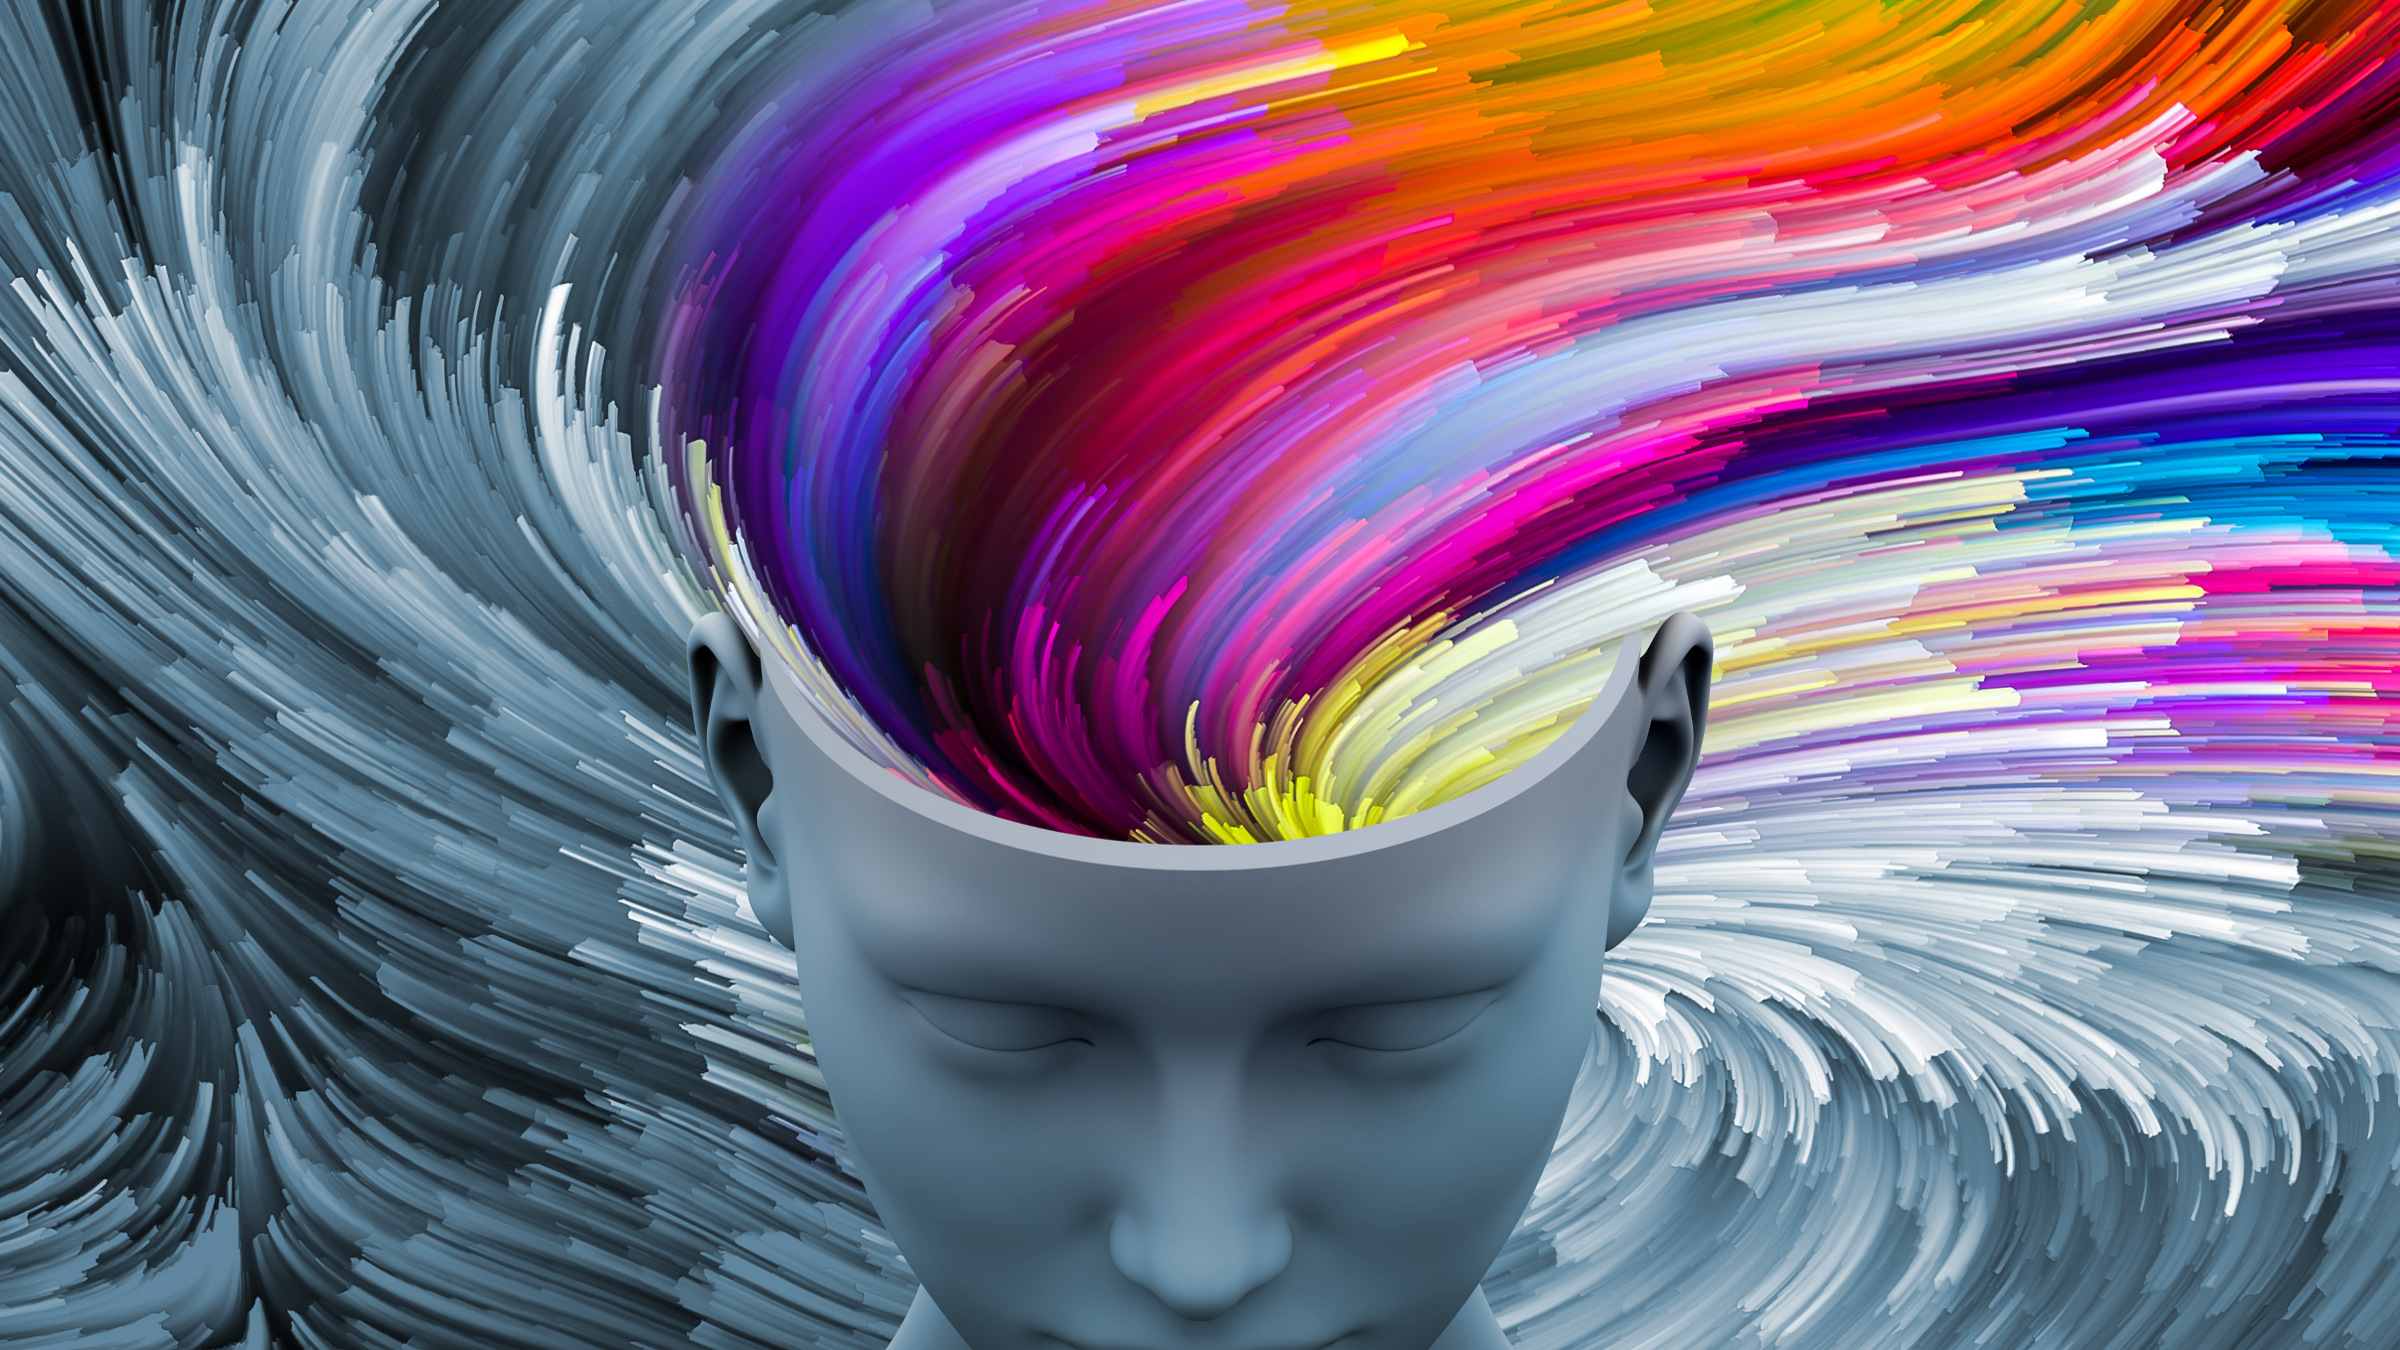 Credit: Getty Images human head with color motion trails, illustration